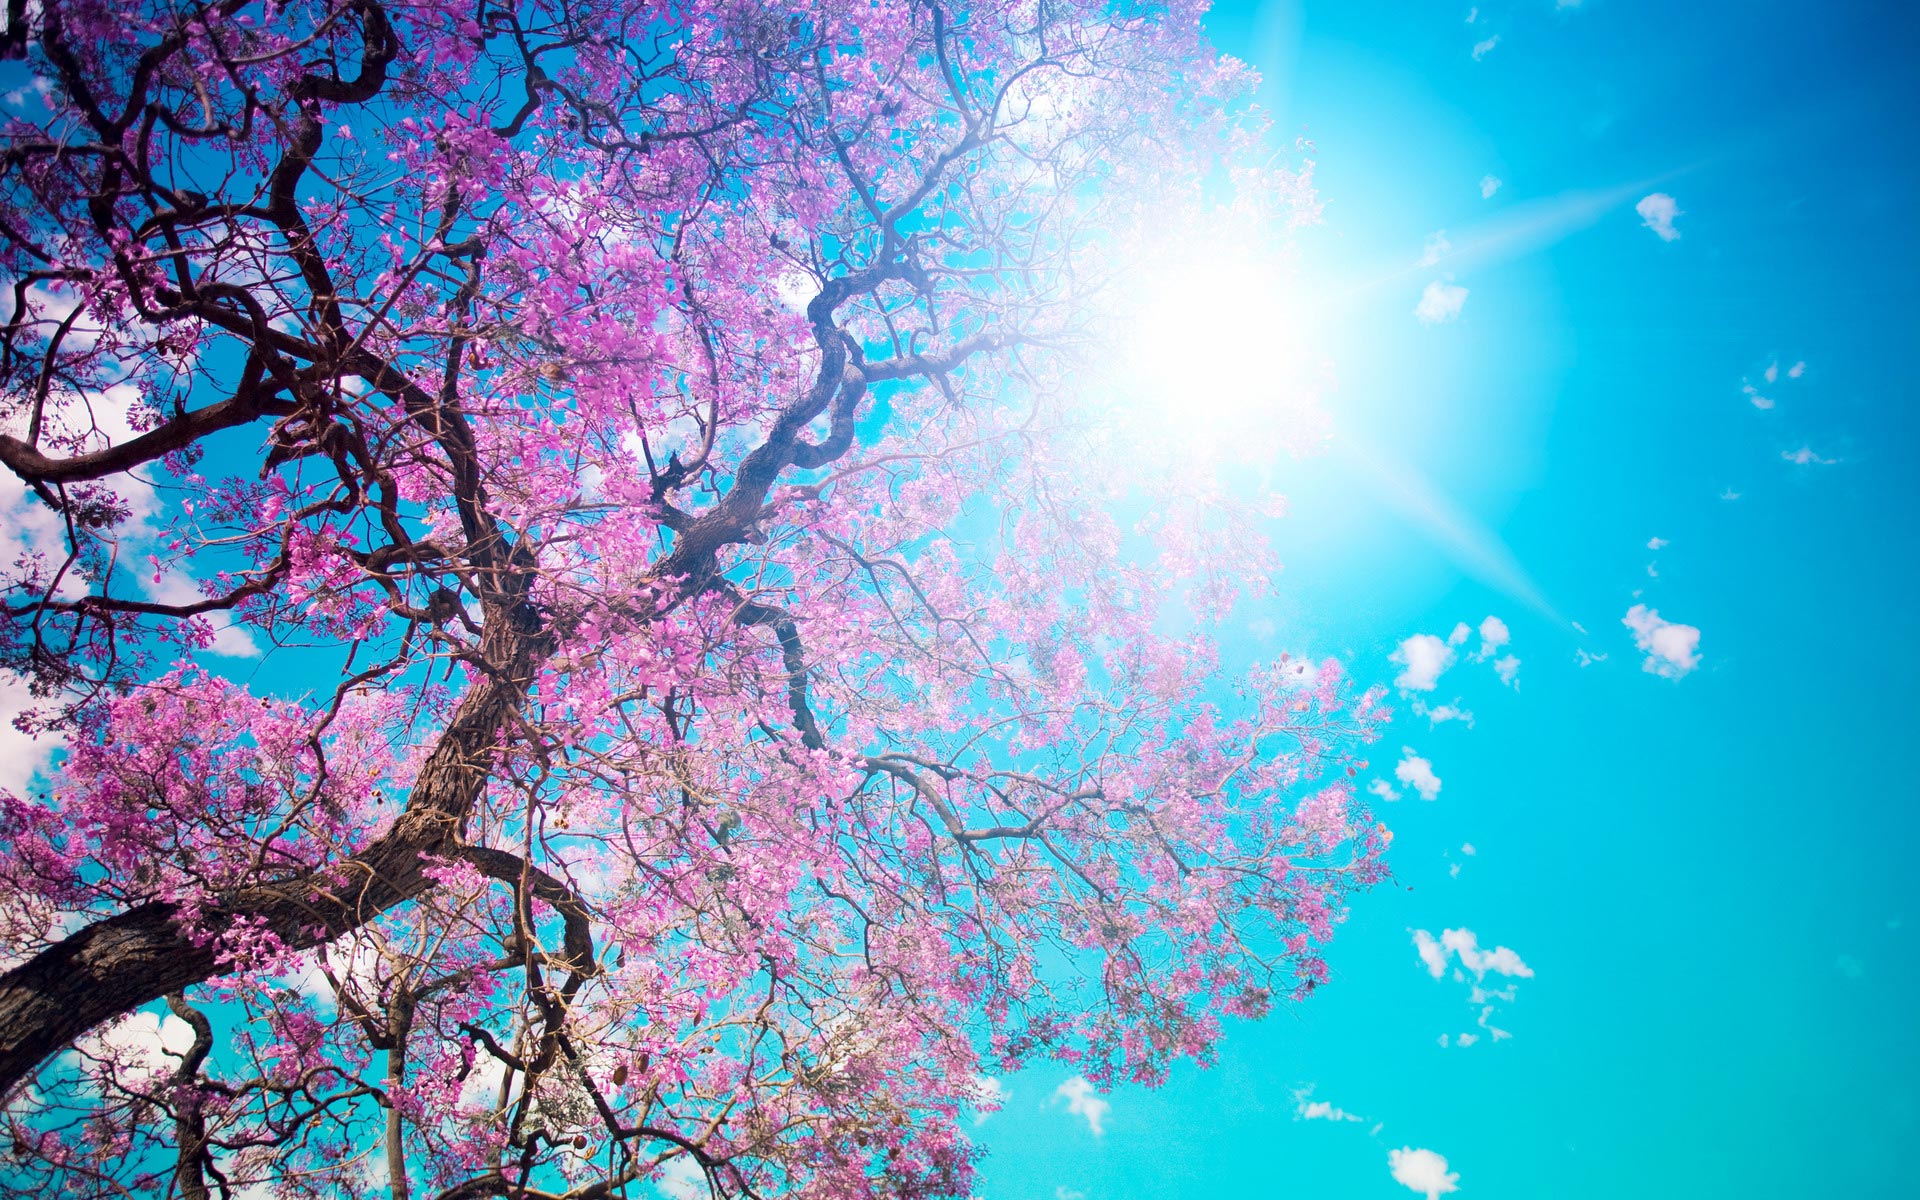 Scenery Wallpaper Includes The Scene Of Blooming Spring Simply